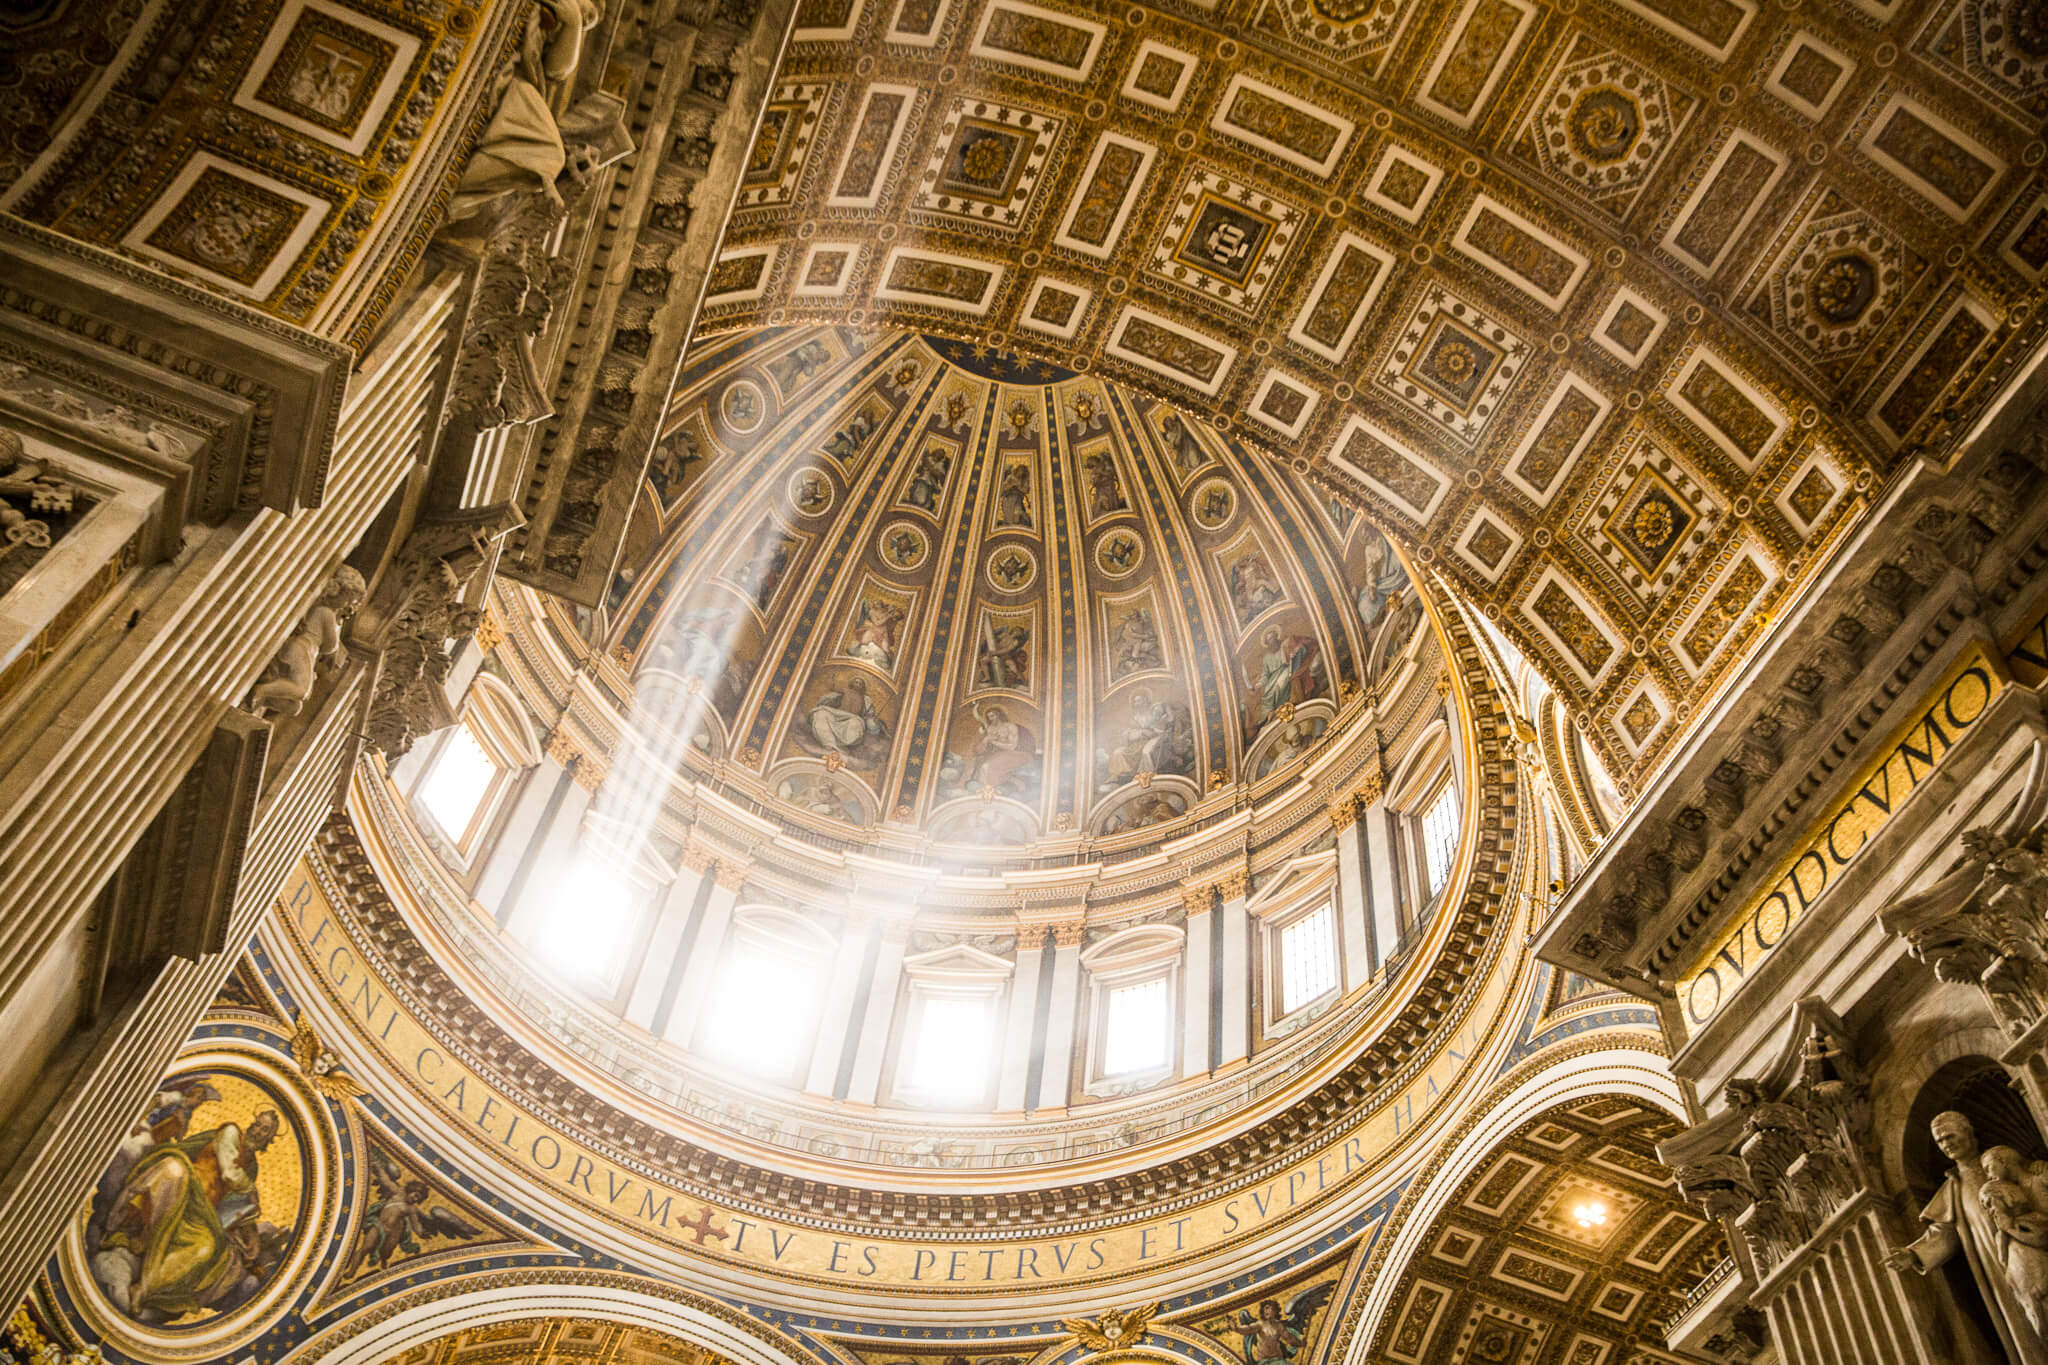 Interior dome of Saint Peter's Basilica in the Vatican